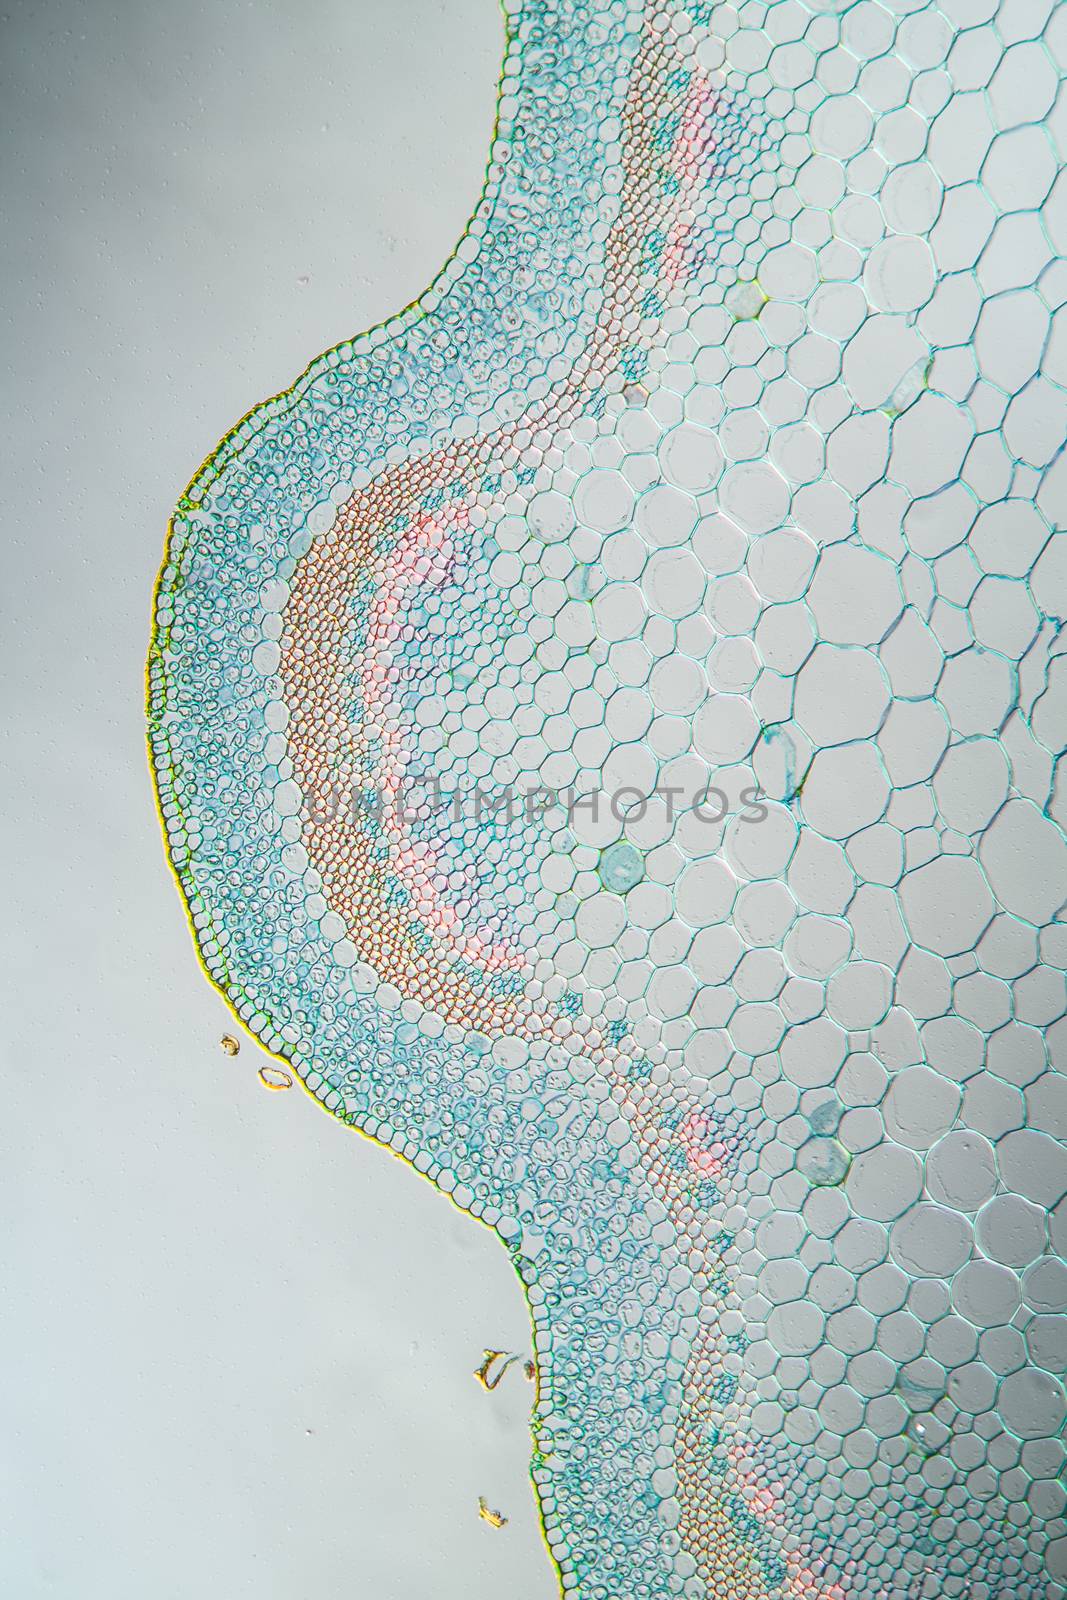 Ribwort stalk in cross section 100x by Dr-Lange